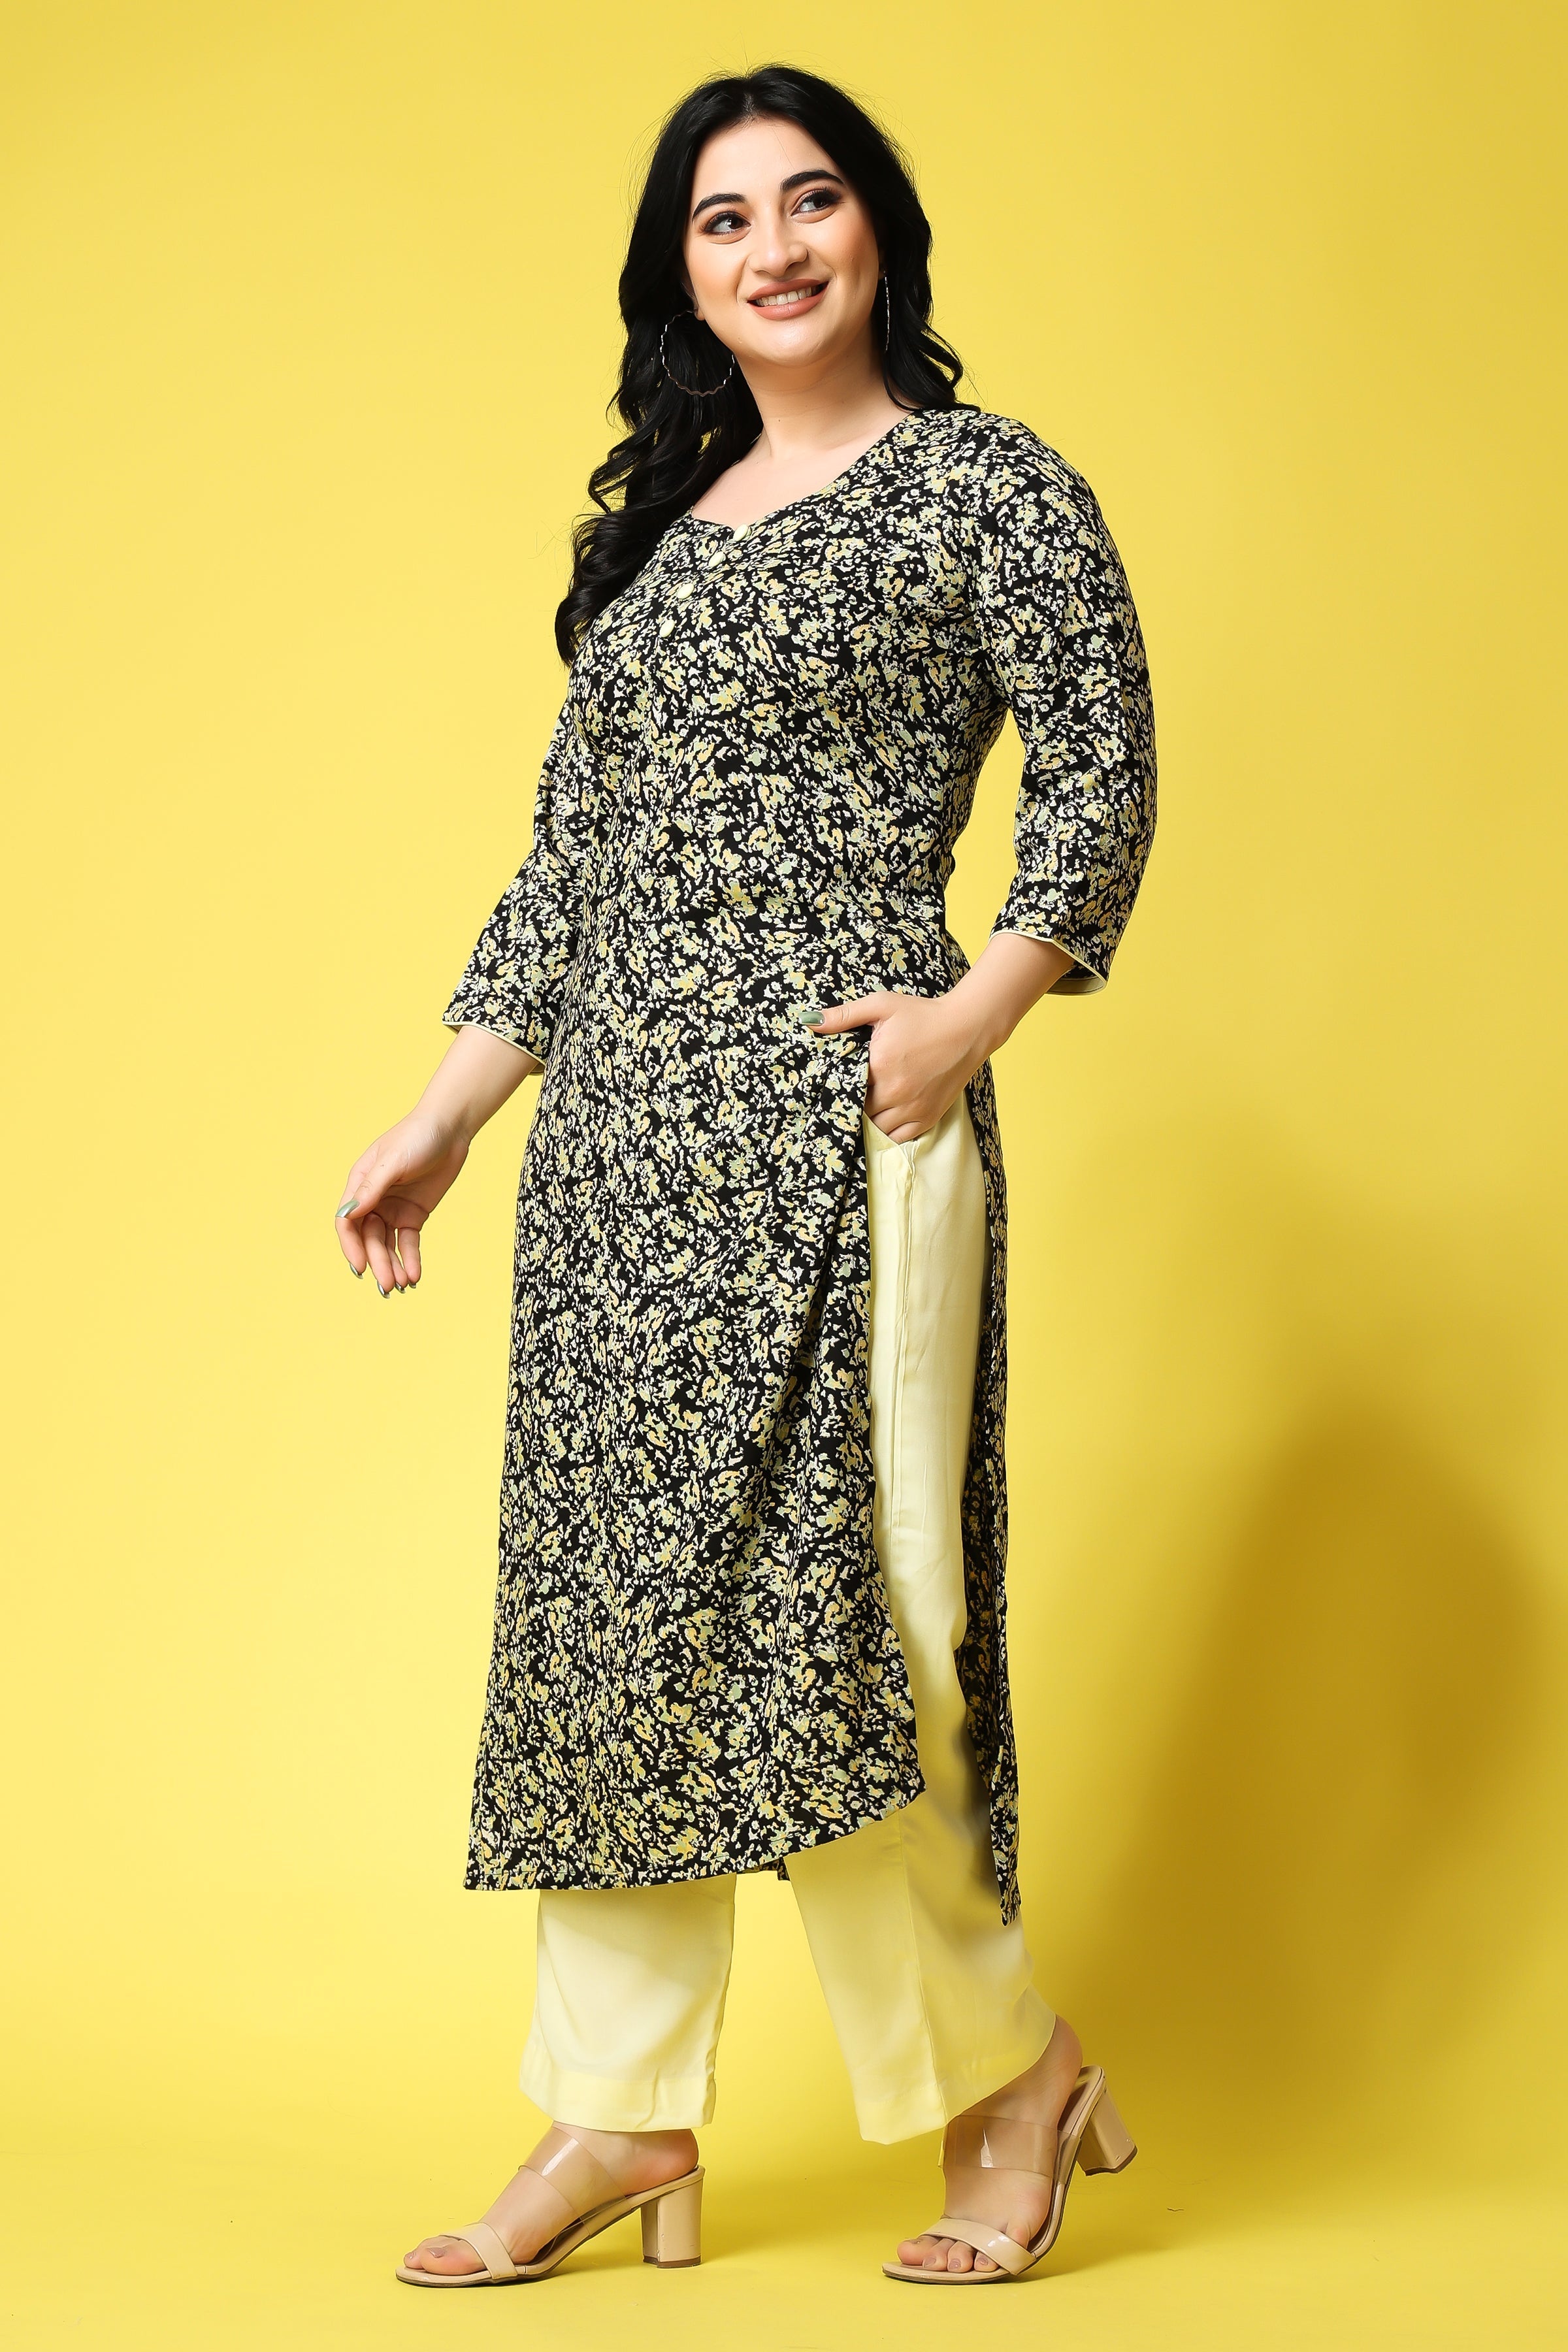 Full Sleeve Round Neck Regular Cotton Ladies Kurti, Size : M, XL, Age Group  : Adults at Rs 200 / in delhi